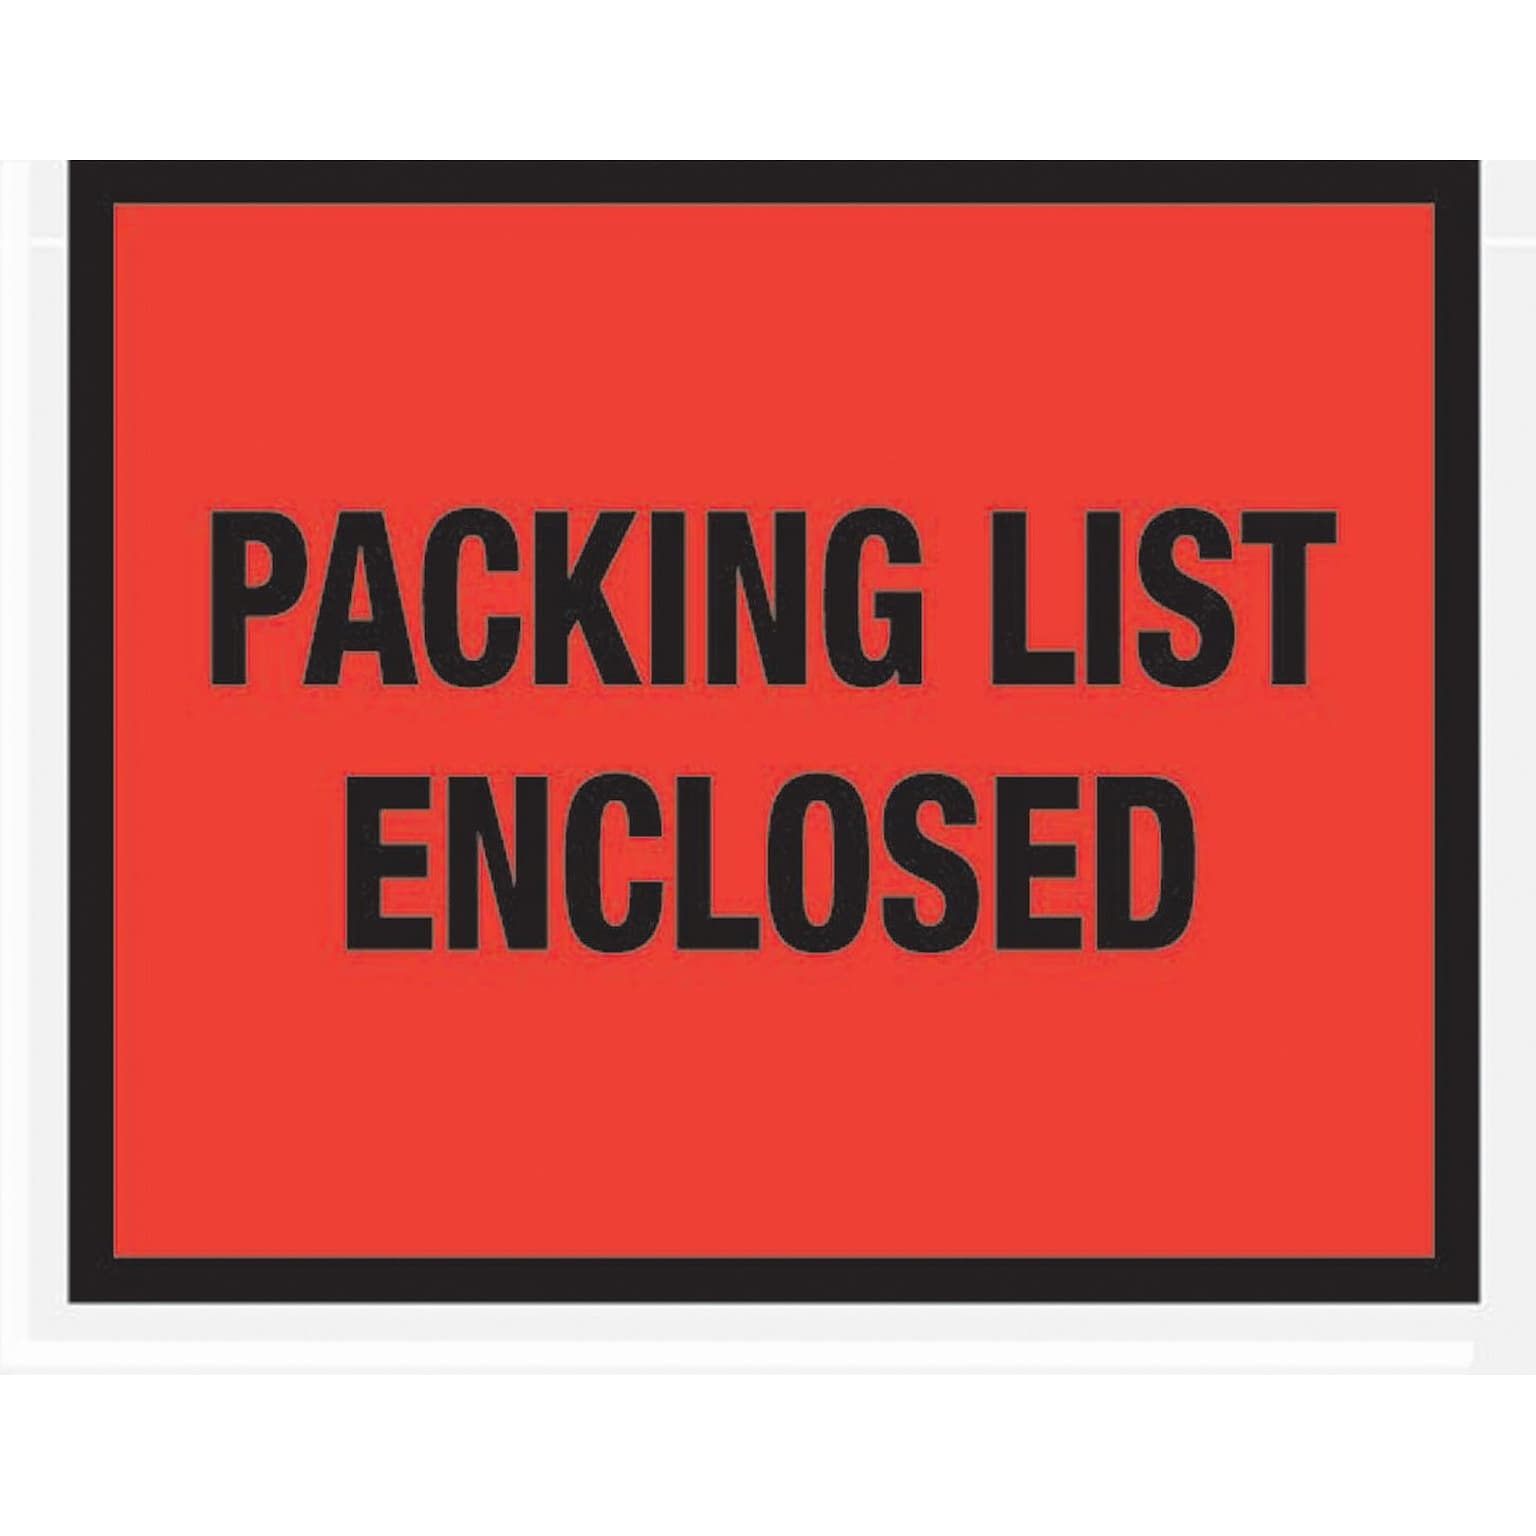 Packing List Envelopes, 7 x 5-1/2, Red Full Face Packing List Enclosed, 1000/Case